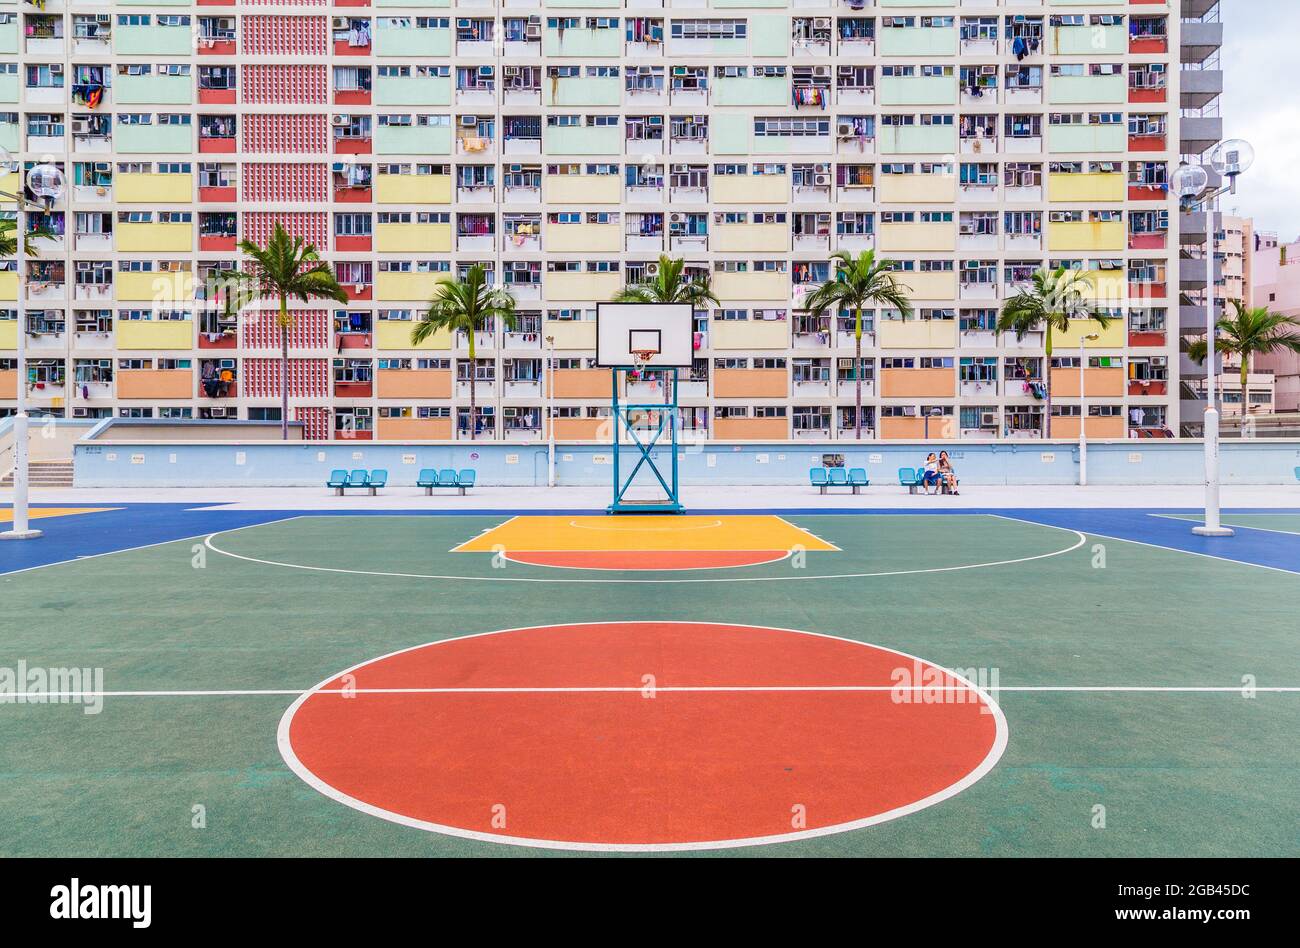 HONG KONG - 10TH APRIL 2017: A basketball court and colourful facades and architecture in Kowloon, Hong Kong. People can be seen. Stock Photo